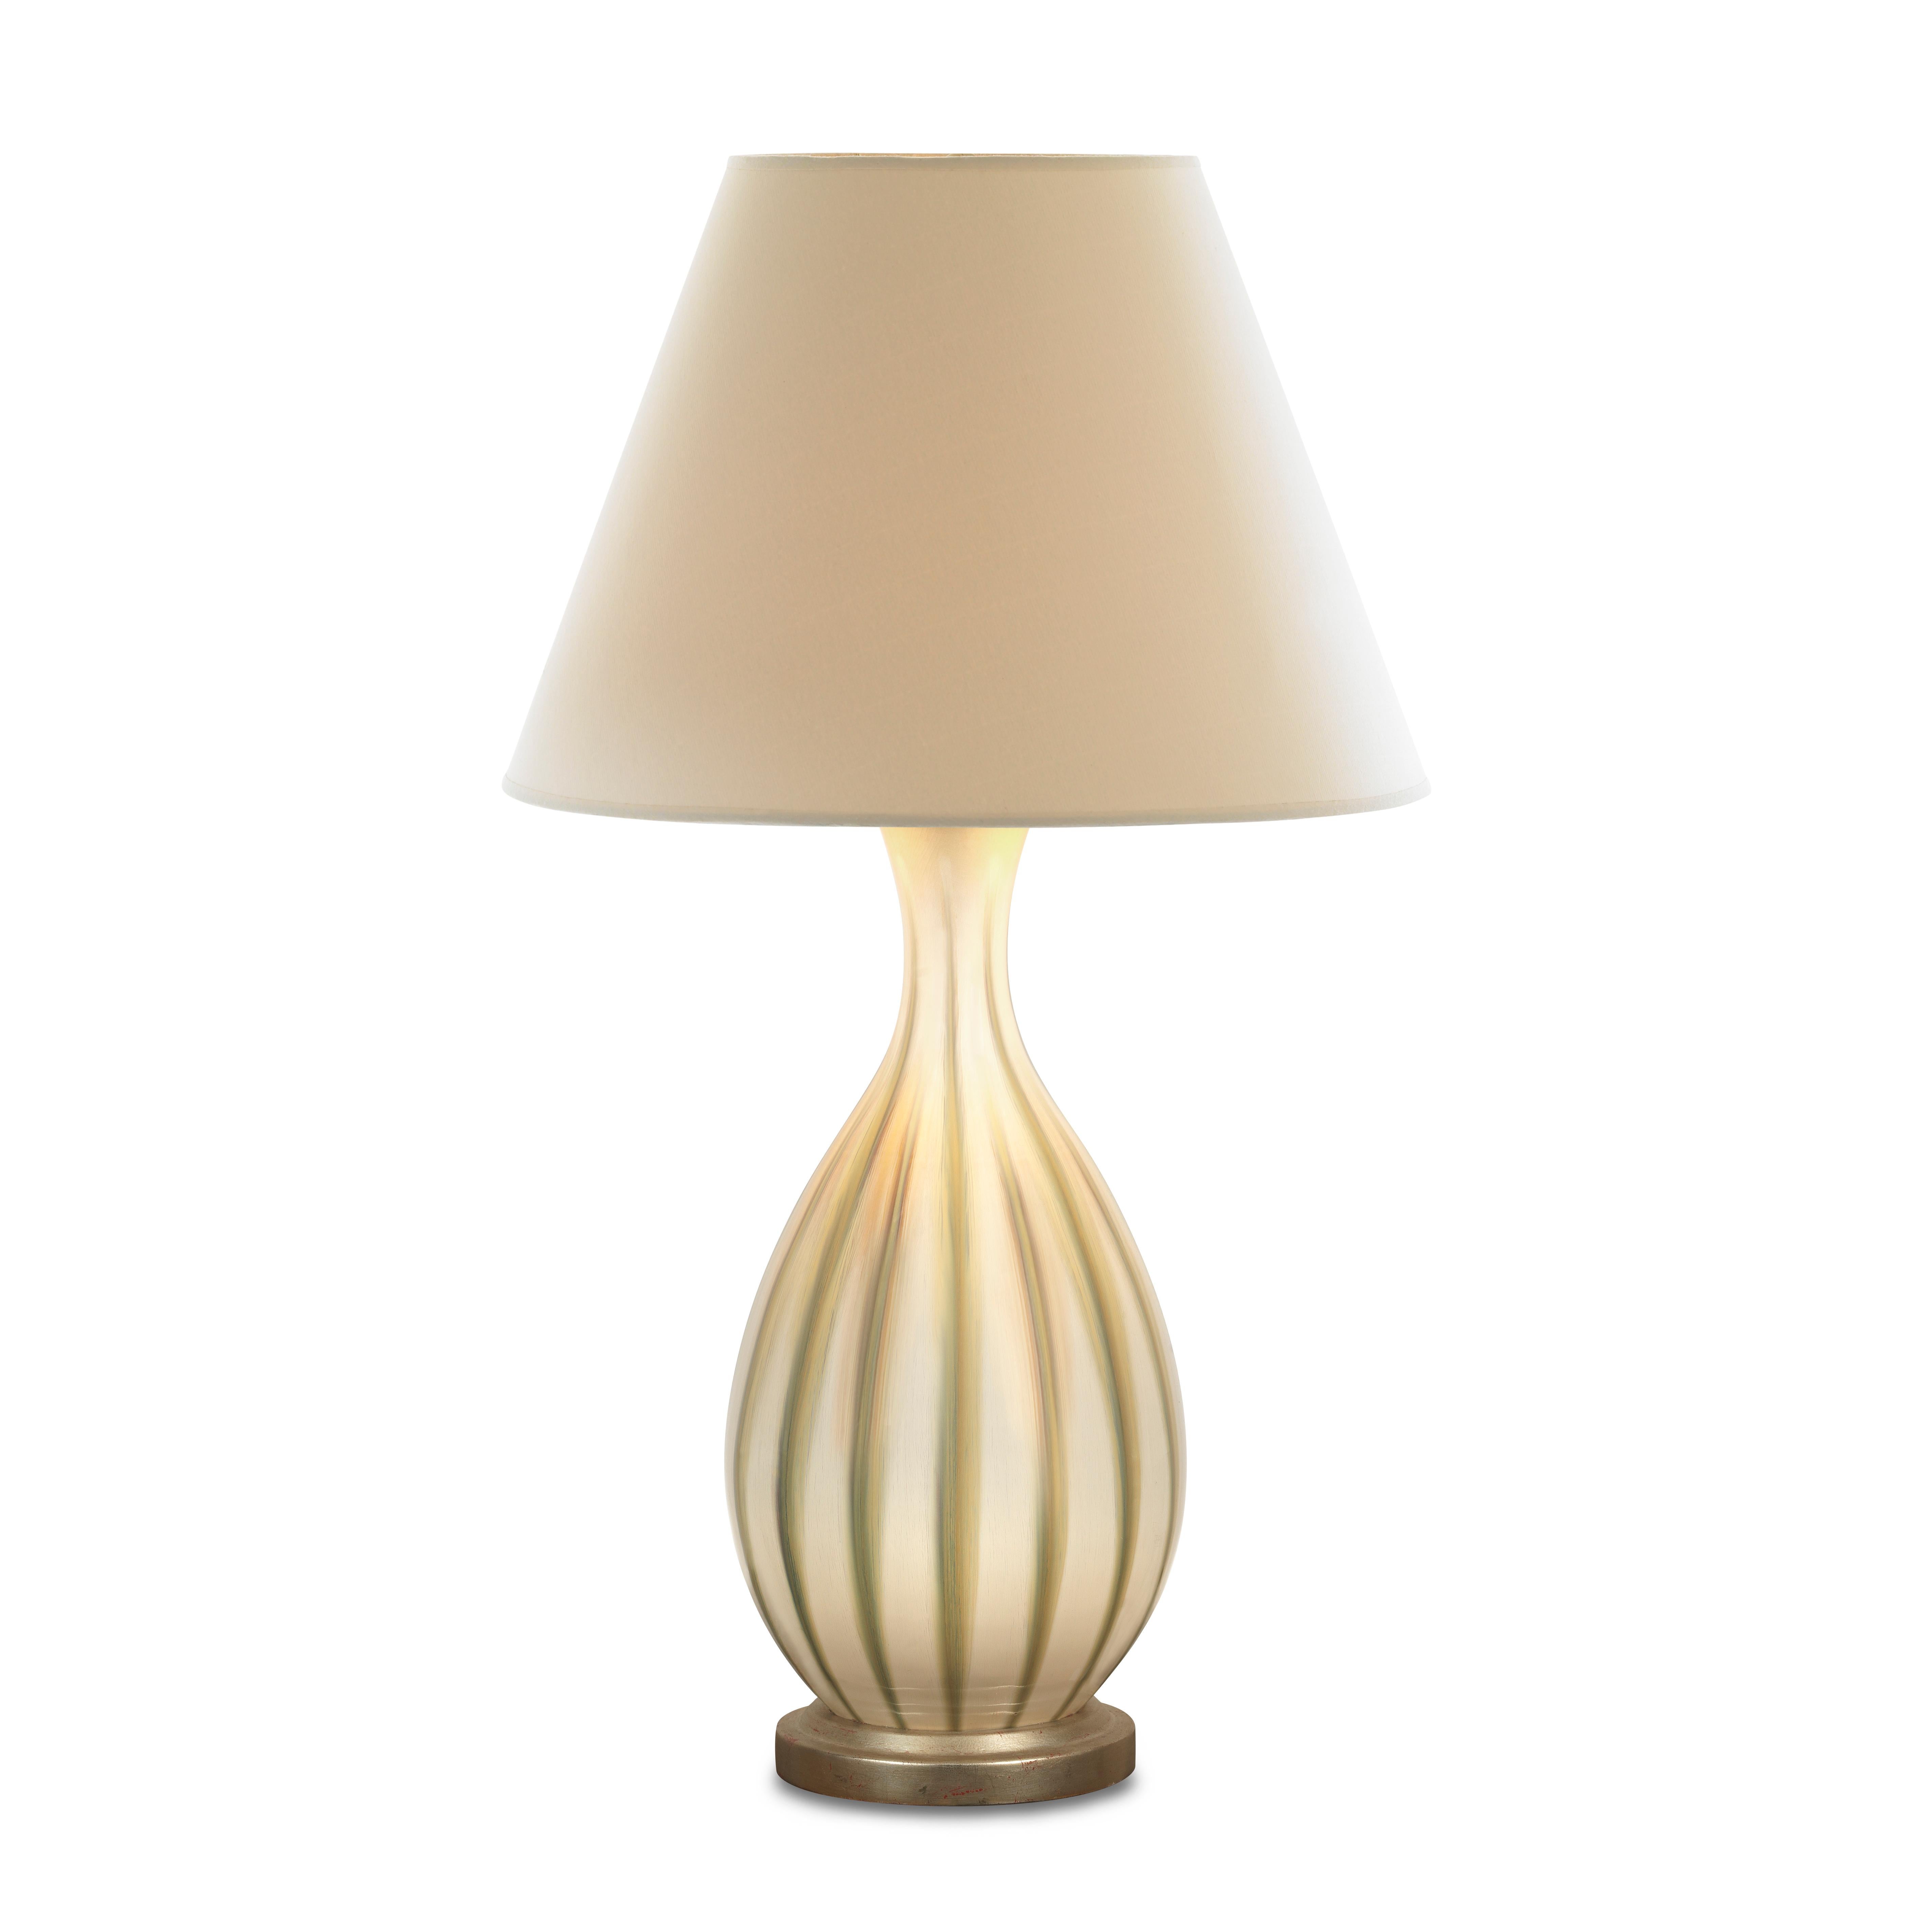 It’s hard to go wrong when you bring the colors of the outdoors into your room. Bring the tranquil feeling of your garden indoors with our Lichen Lamp whose elongated oval ceramic body is glazed in a delicate cream with subtle, hand-painted